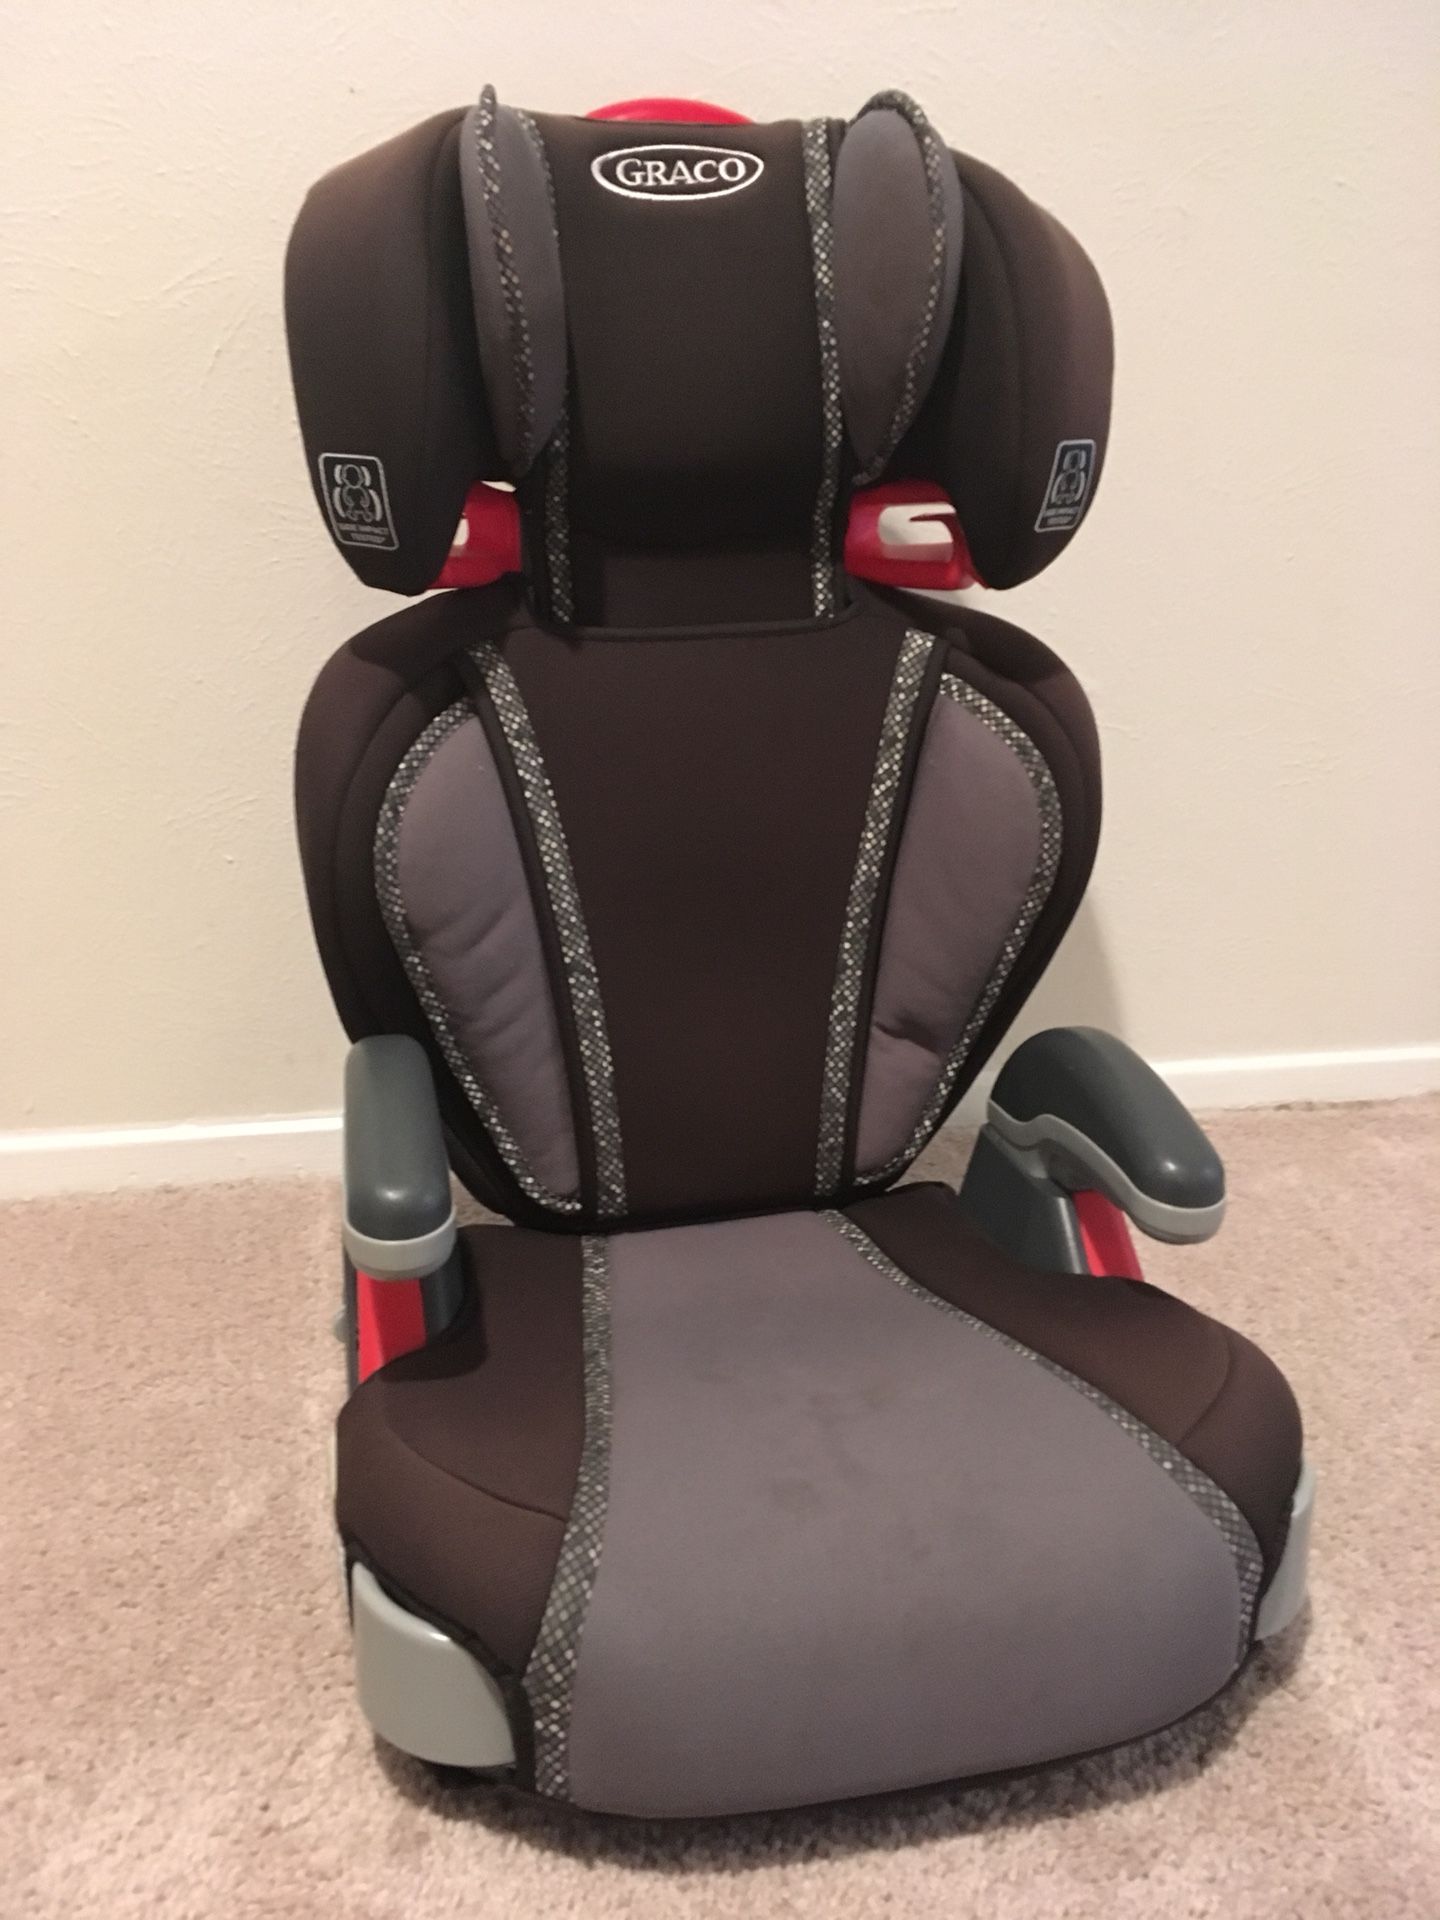 Graco TurboBooster High Back Booster Car Seat